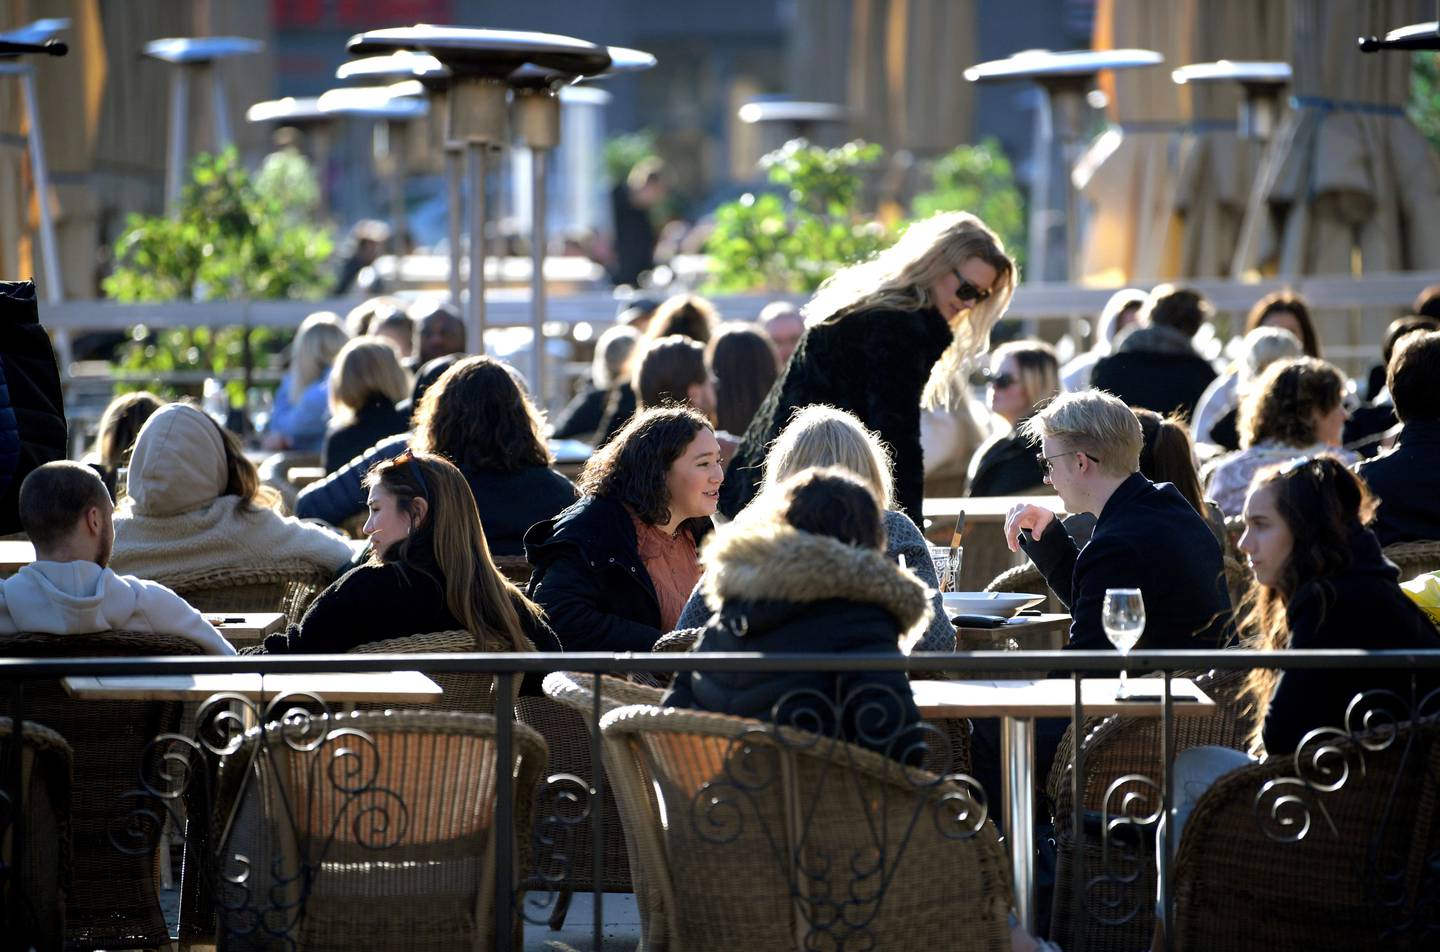 People enjoy the sun at an outdoor restaurant, despite the continuing spread of coronavirus disease (COVID-19), in Stockholm, Sweden March 26, 2020. TT News Agency/Janerik Henriksson via REUTERS      ATTENTION EDITORS - THIS IMAGE WAS PROVIDED BY A THIRD PARTY. SWEDEN OUT. NO COMMERCIAL OR EDITORIAL SALES IN SWEDEN.